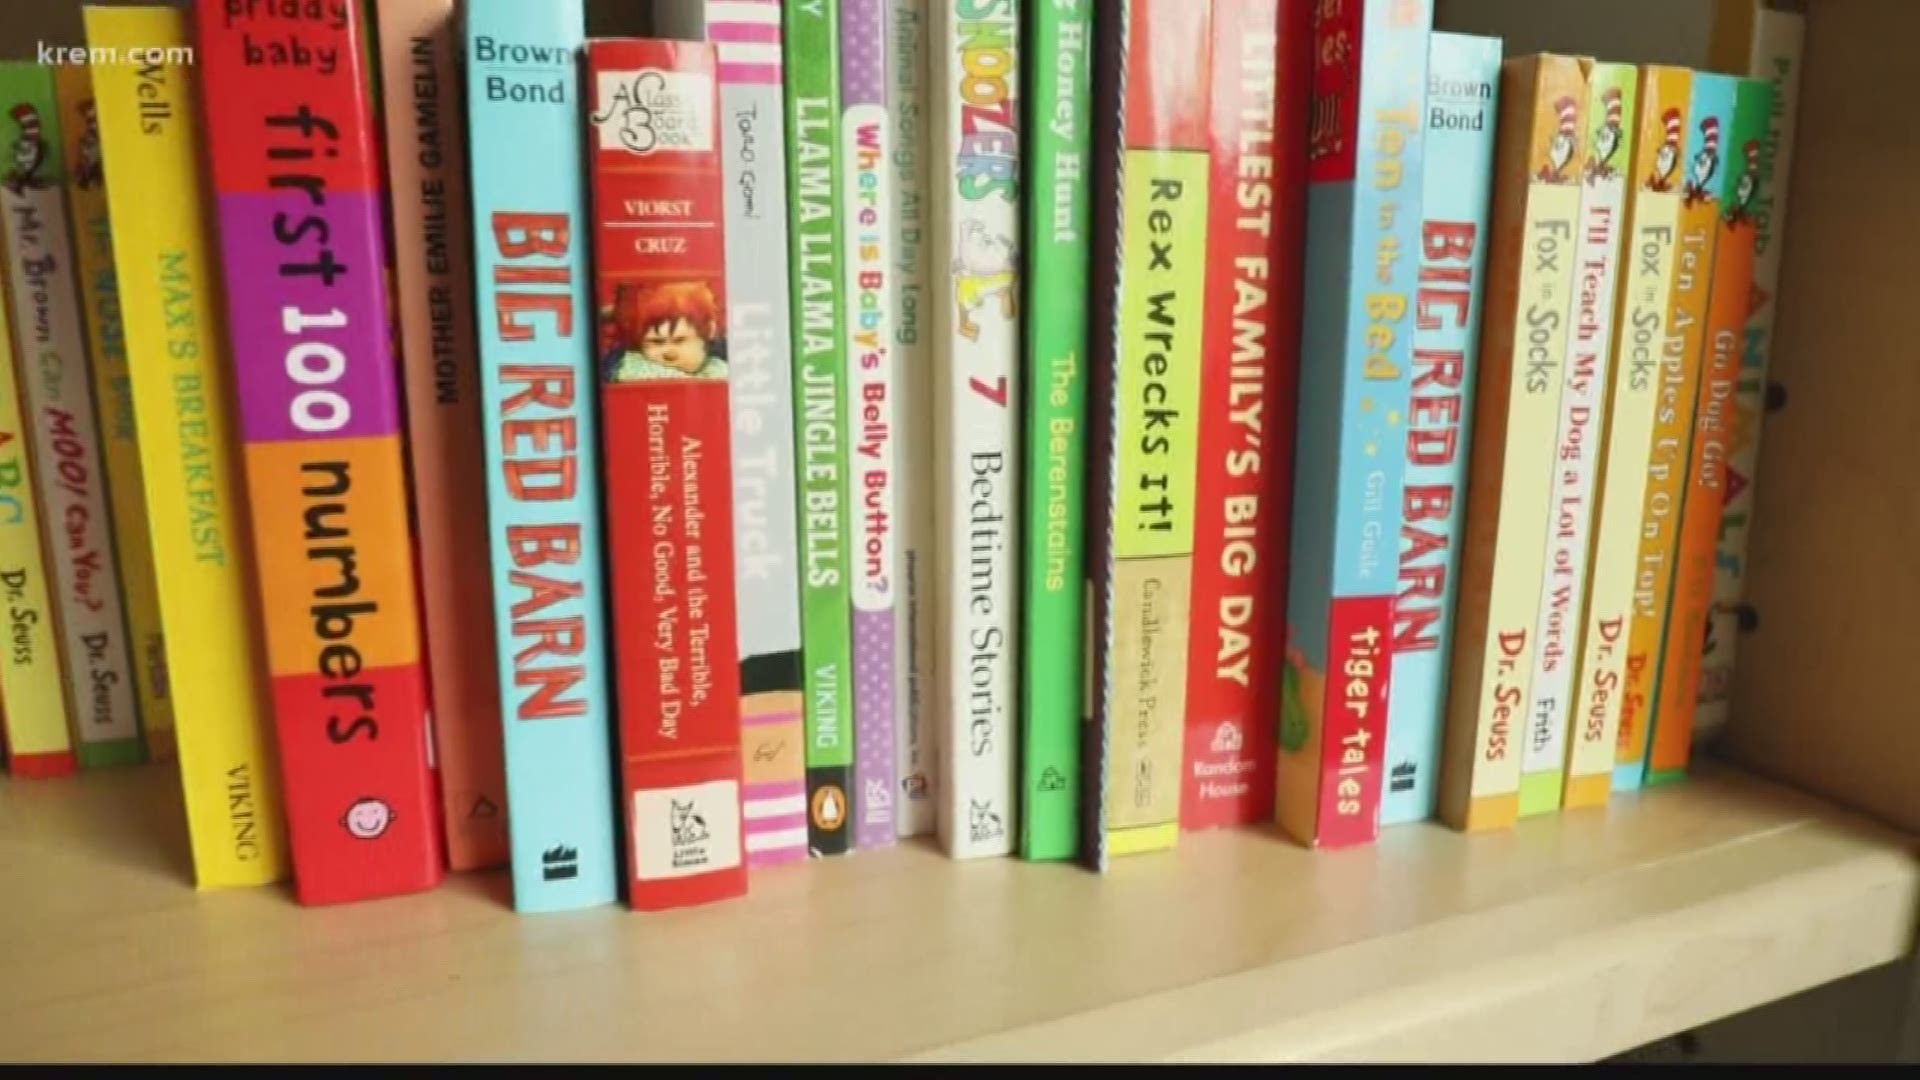 Issac's Bookshelf, which provides books to families with children in the hospital, has won the June 2019 round of KREM 2 and STCU's 'Who do you love?' campaign.